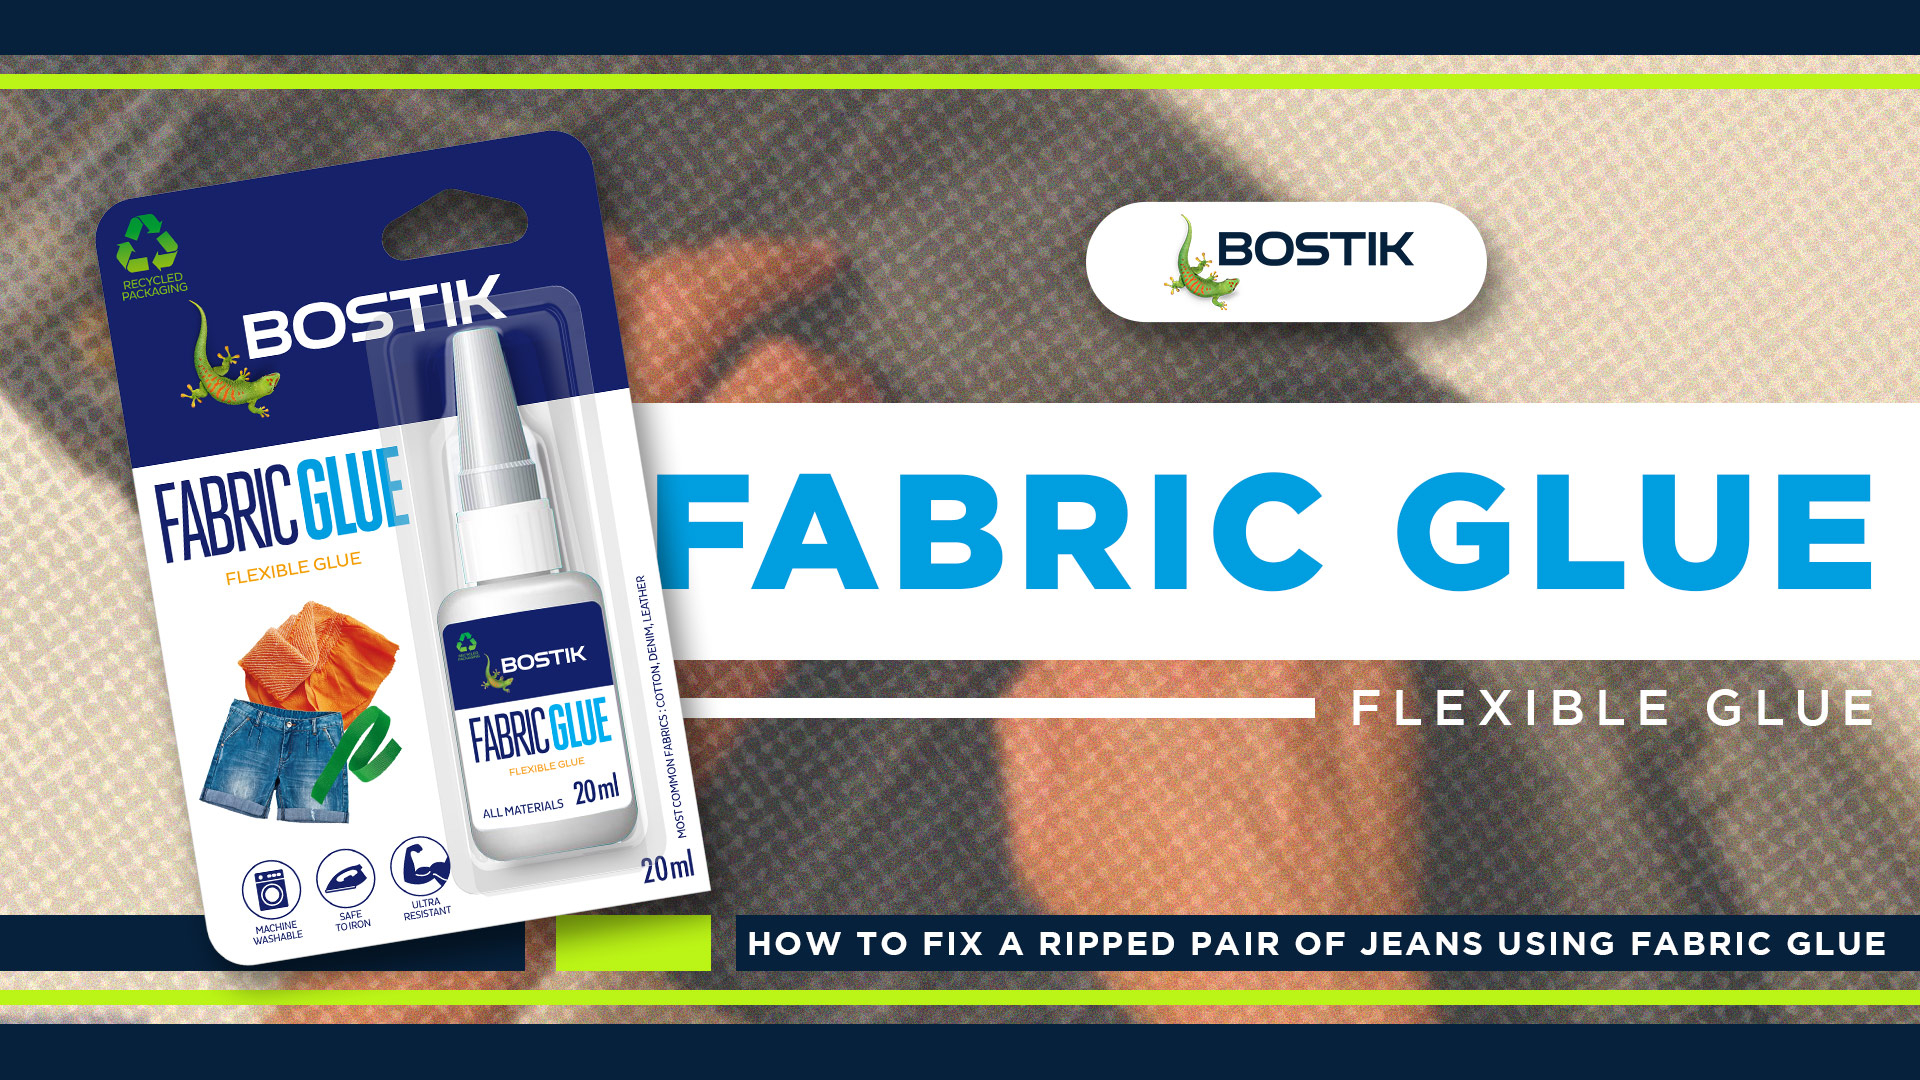 Bostik's Best Fabric Glue  Waterproof Fabric Glue for Clothes